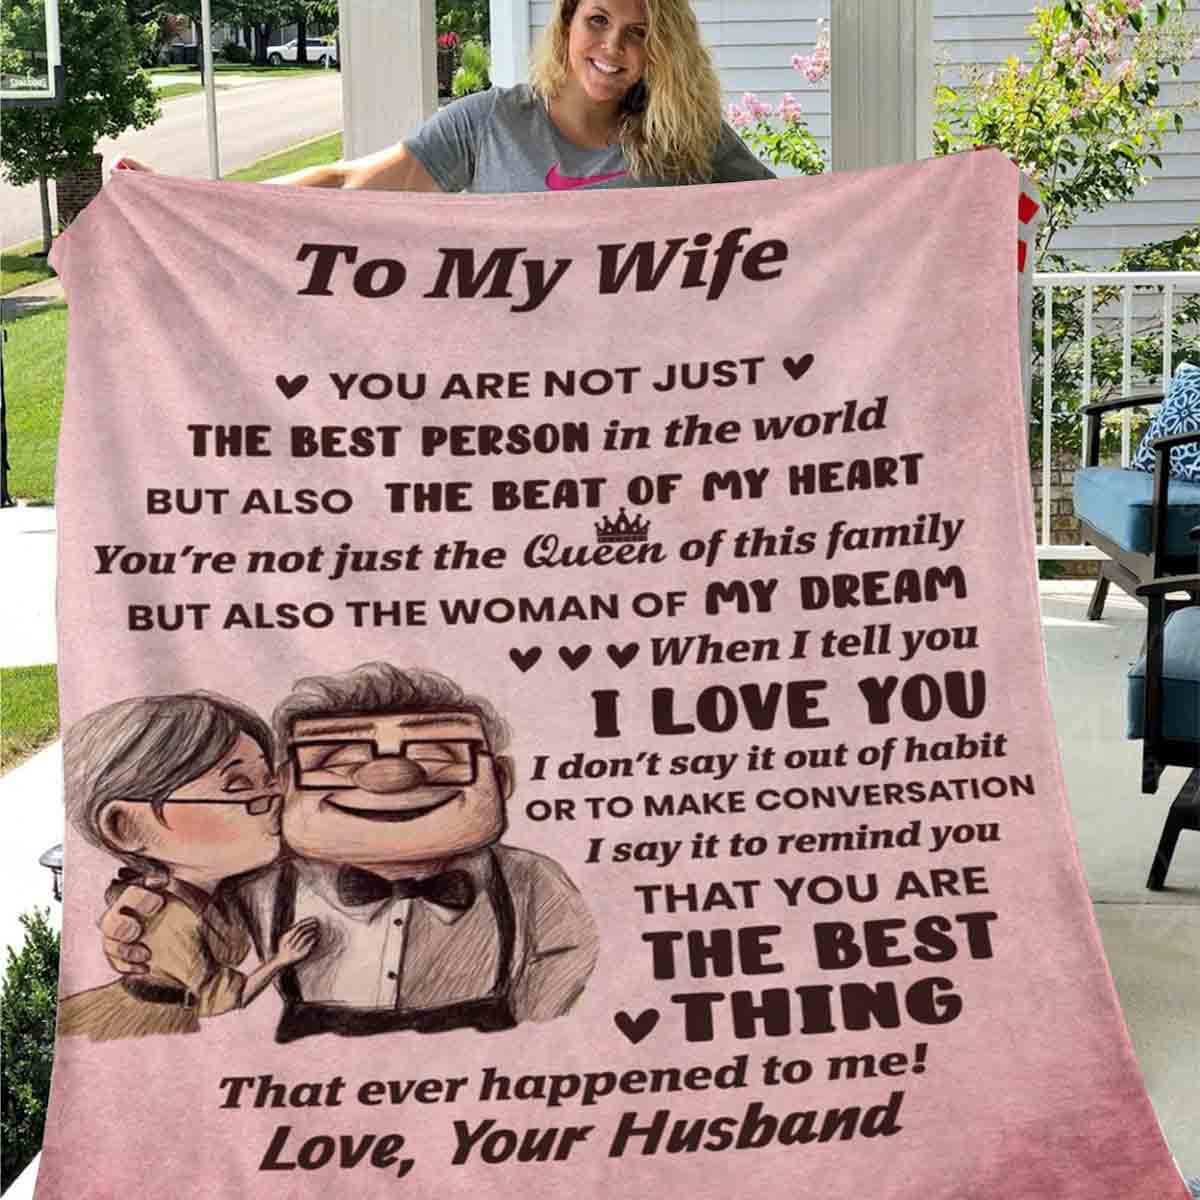 The Best Person In The World | To My Wife Cozy Blanket